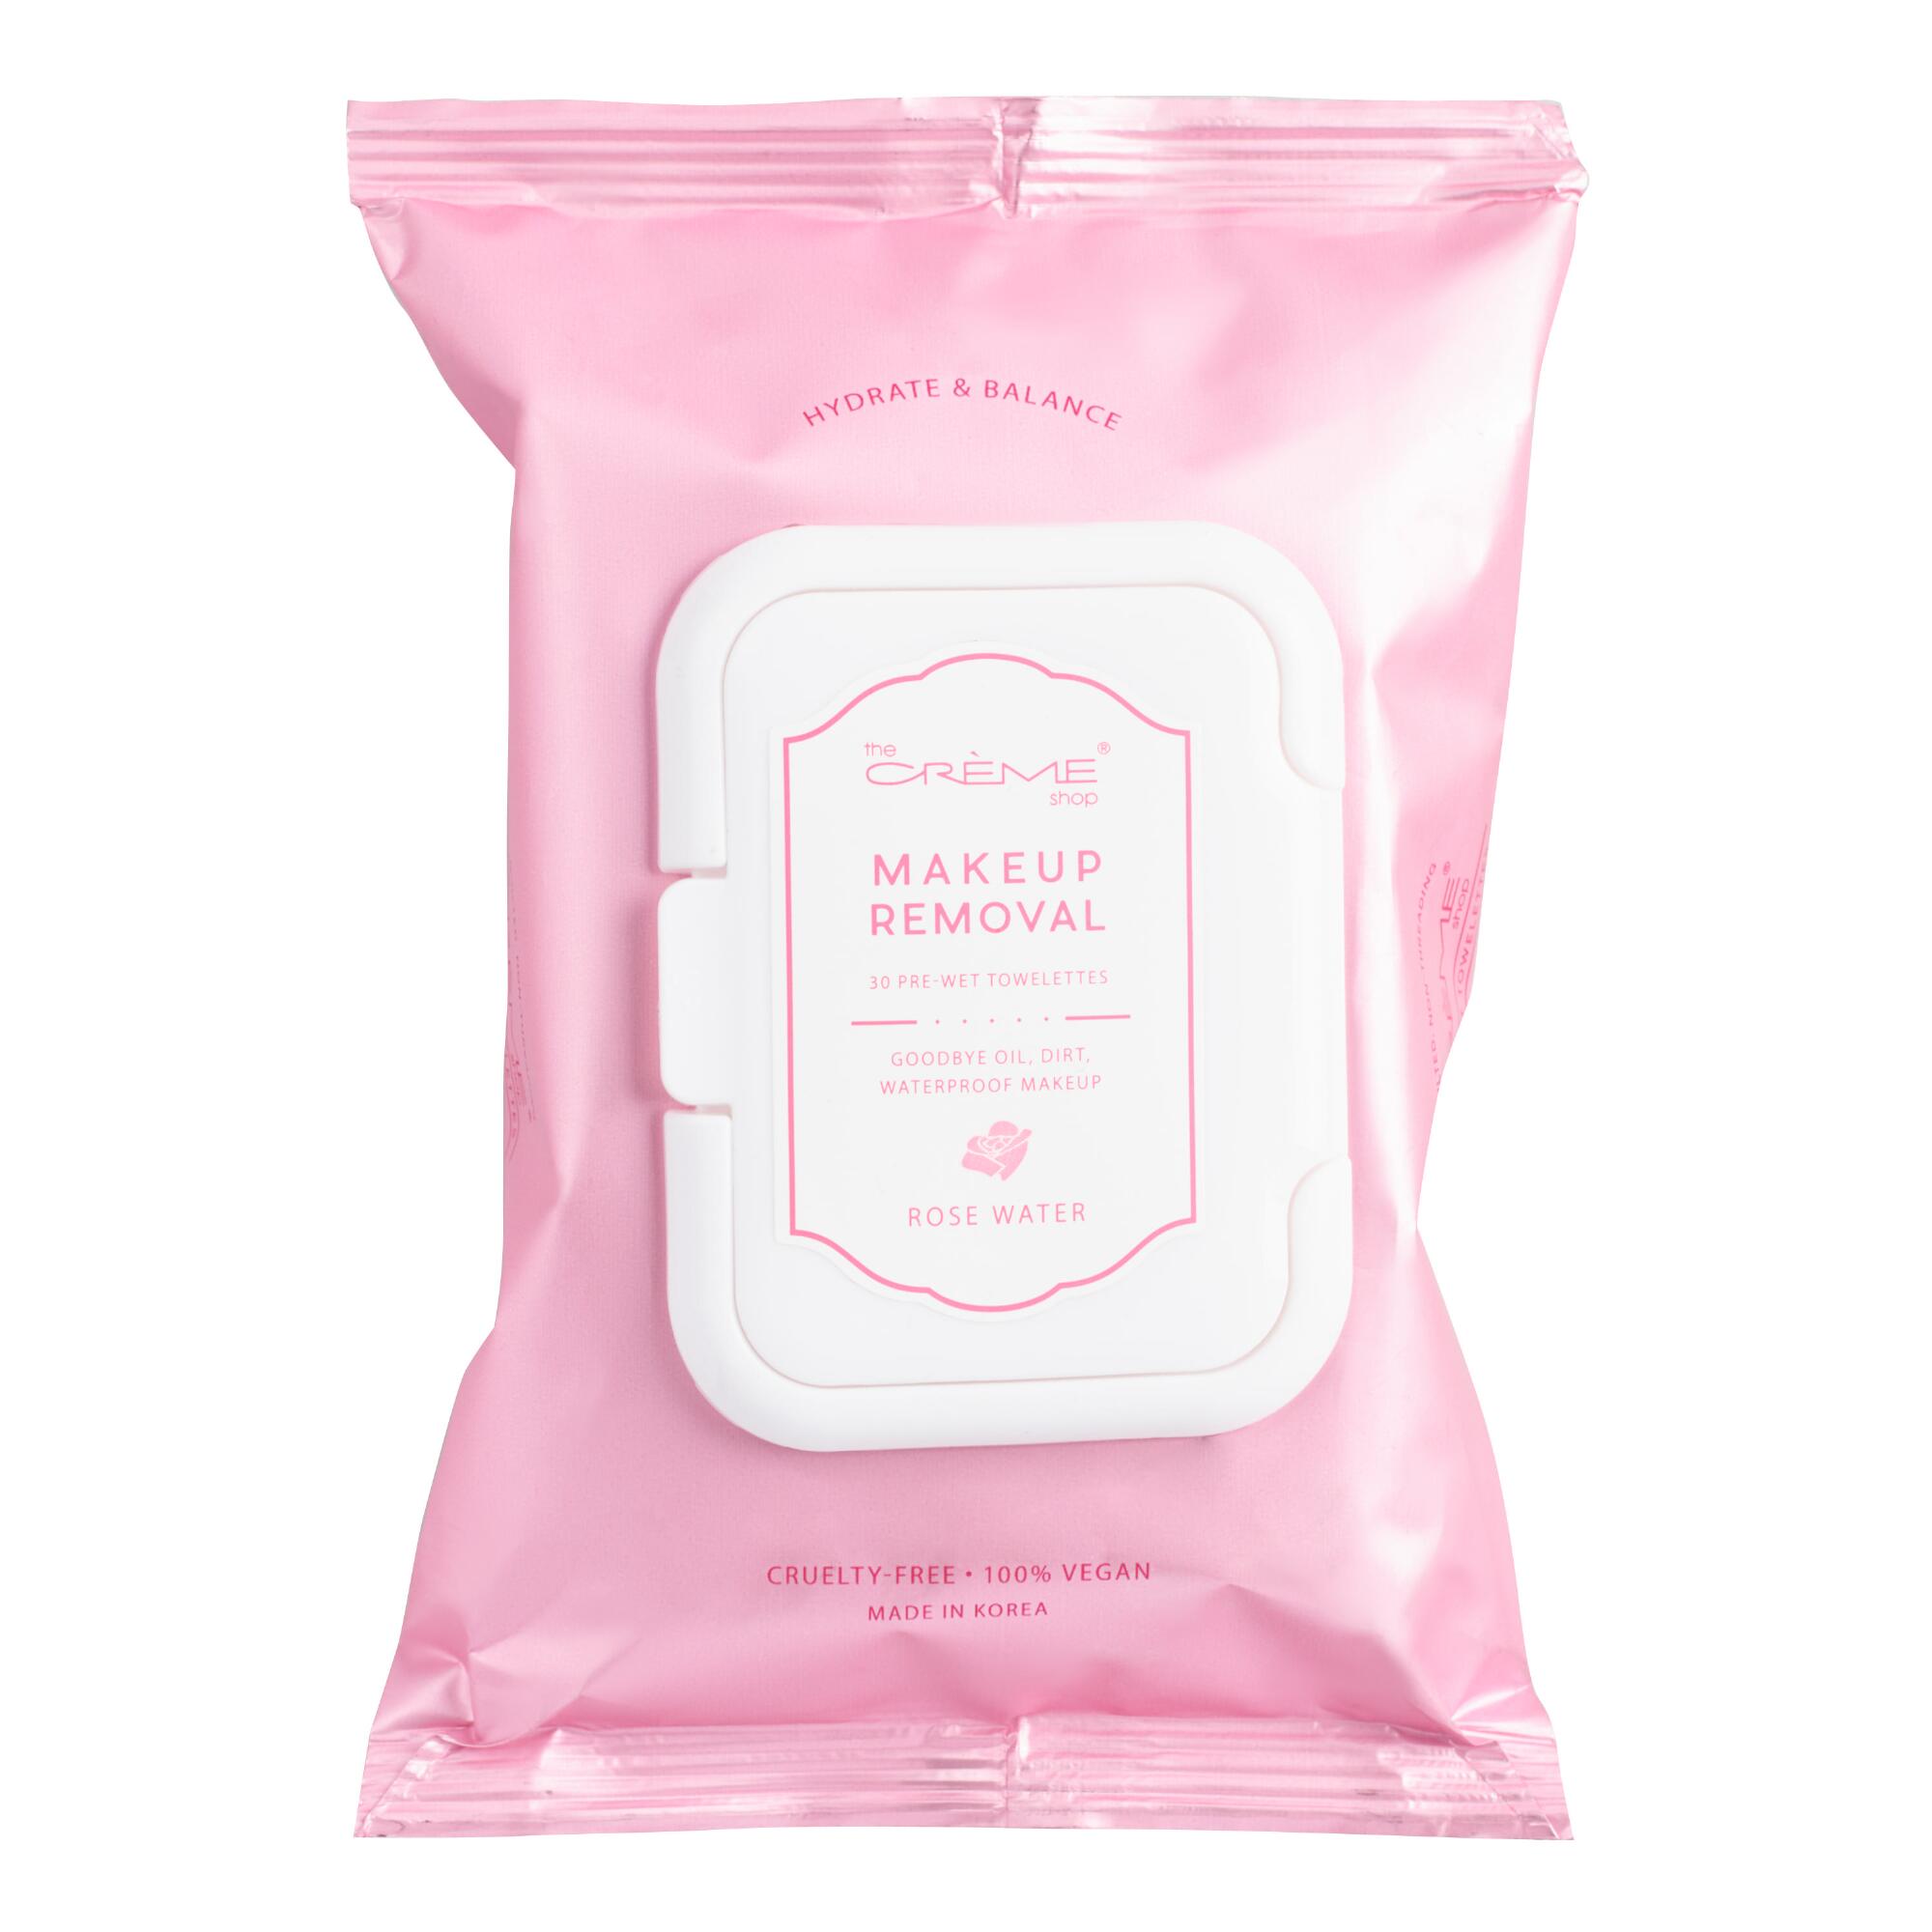 Creme Shop Korean Beauty Rose Water Makeup Removal Wipes by World Market